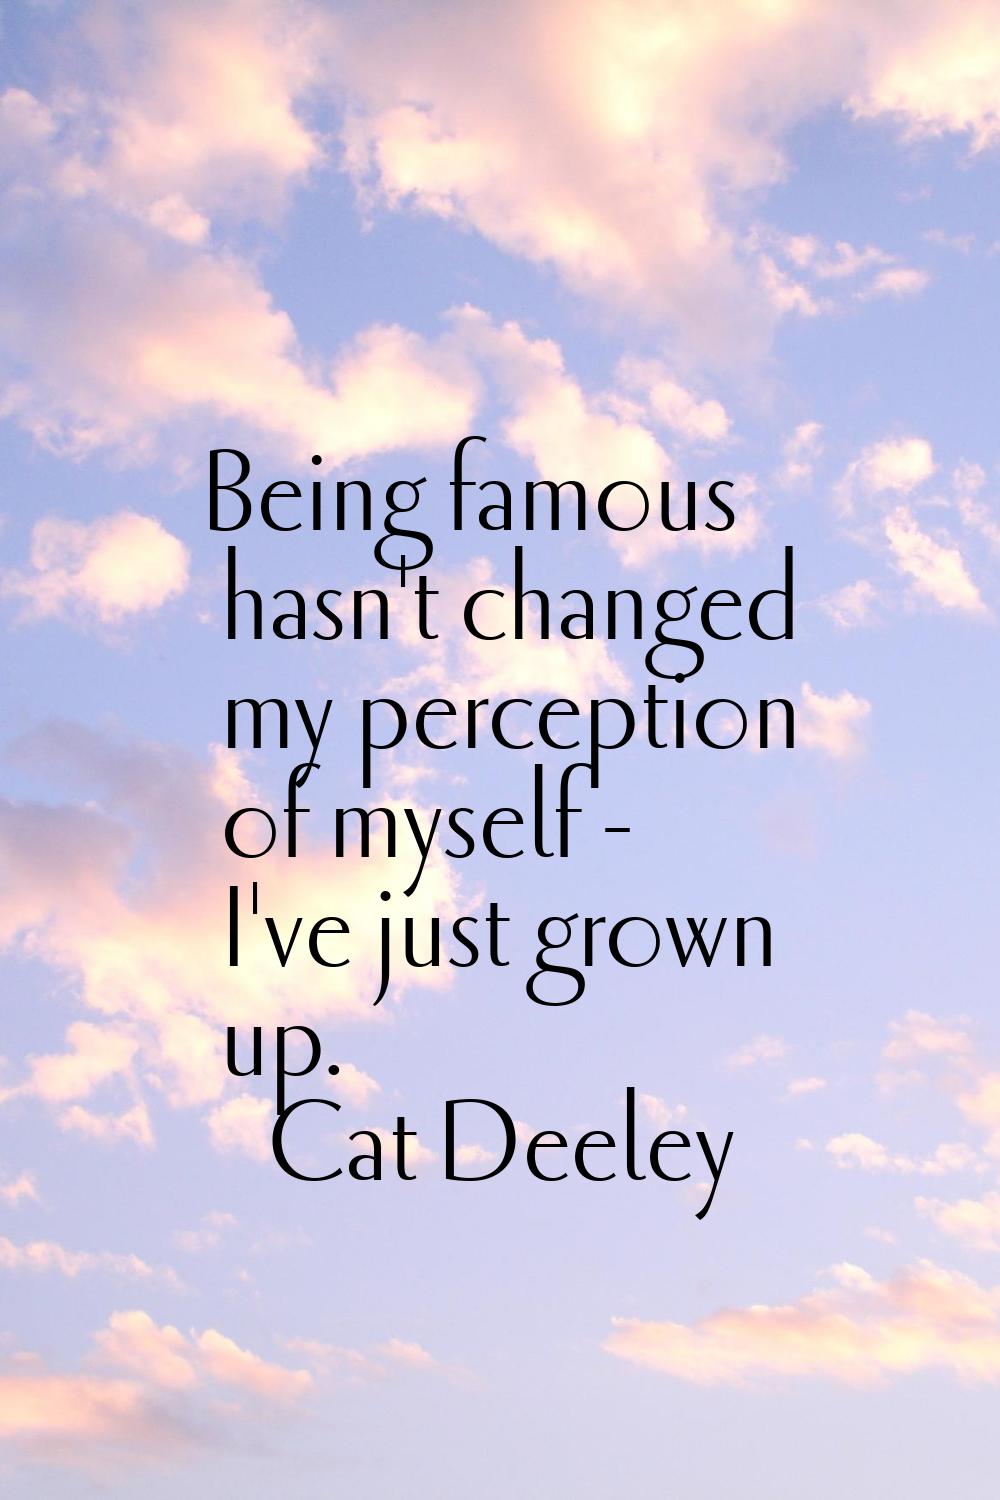 Being famous hasn't changed my perception of myself - I've just grown up.